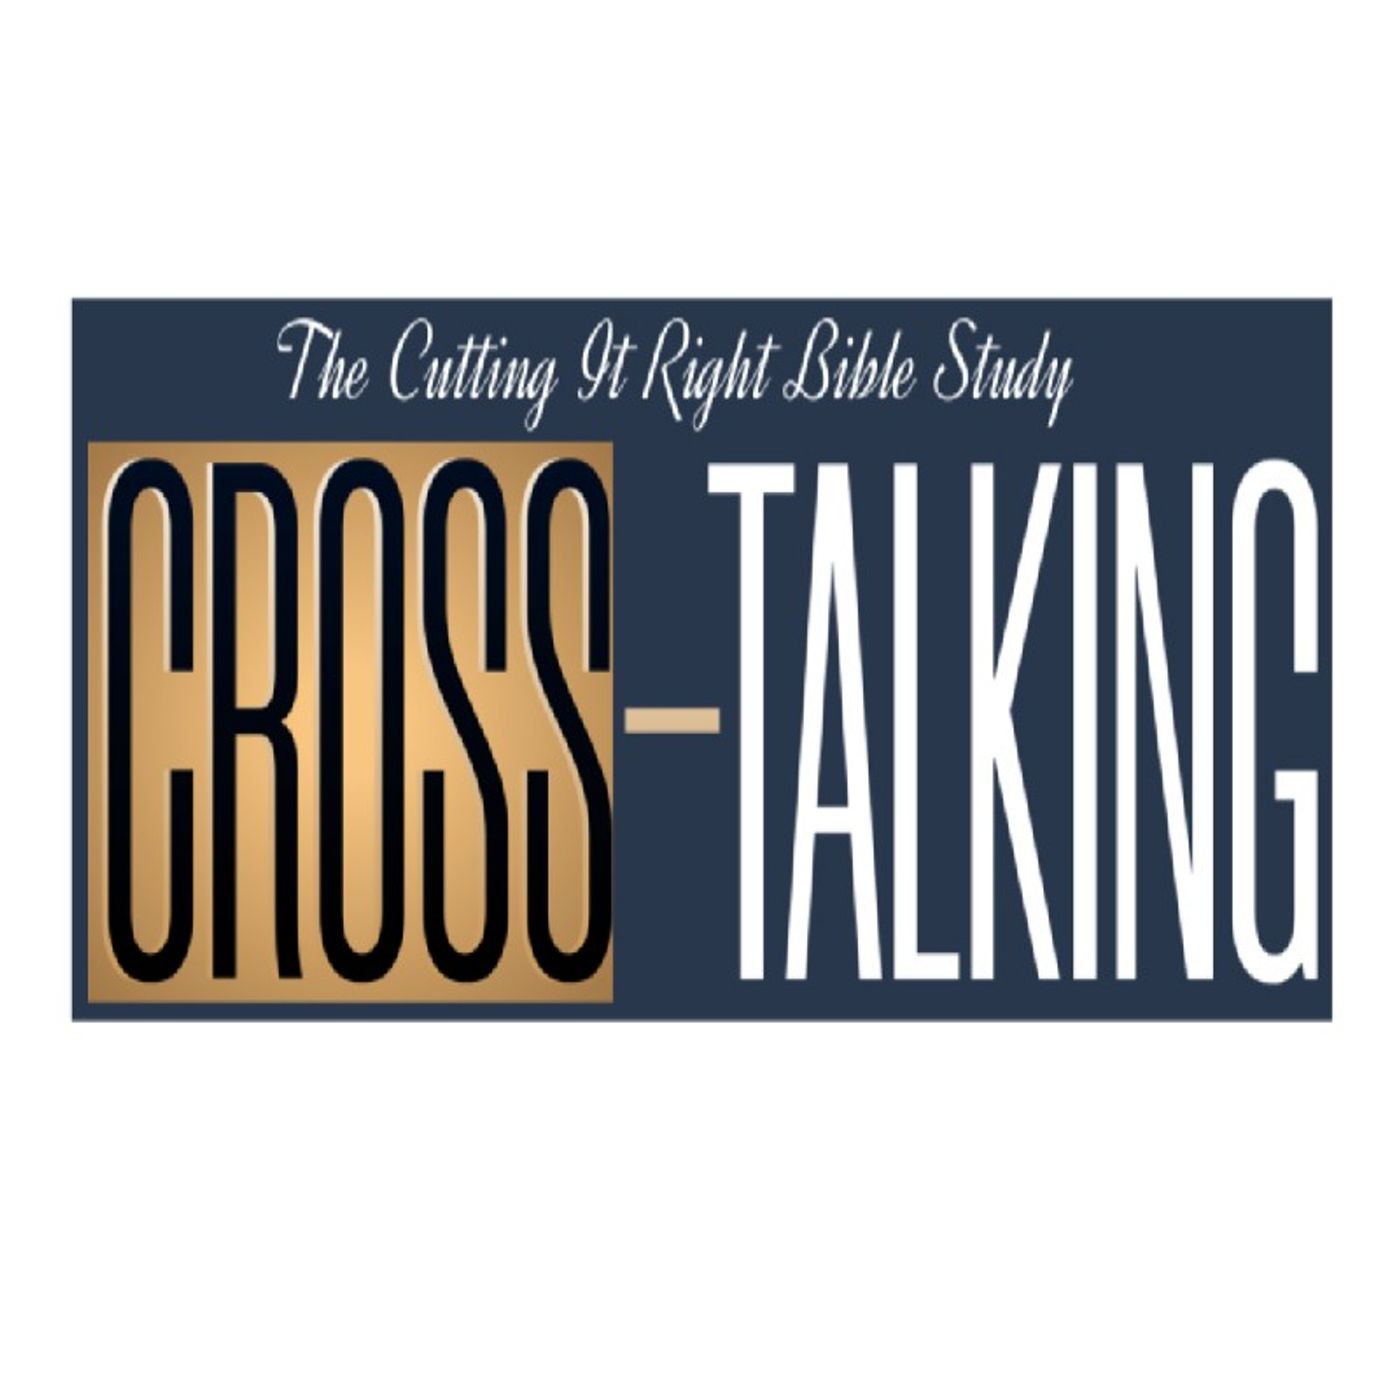 Cross-Talking: 'The Word Of The Cross 101' (lesson 2)